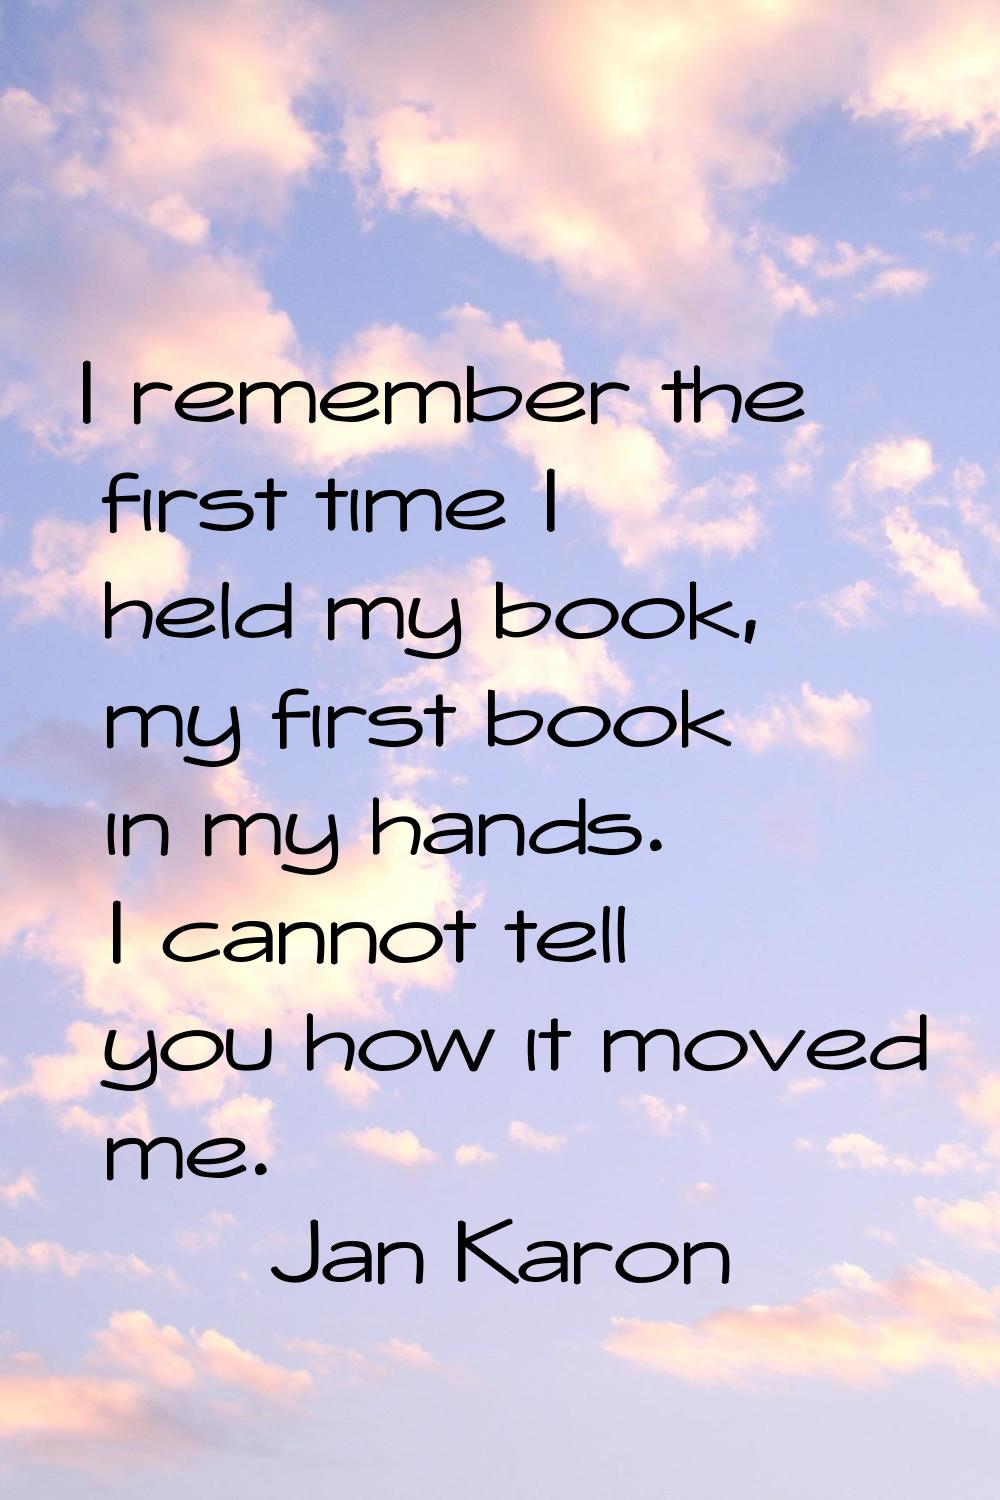 I remember the first time I held my book, my first book in my hands. I cannot tell you how it moved